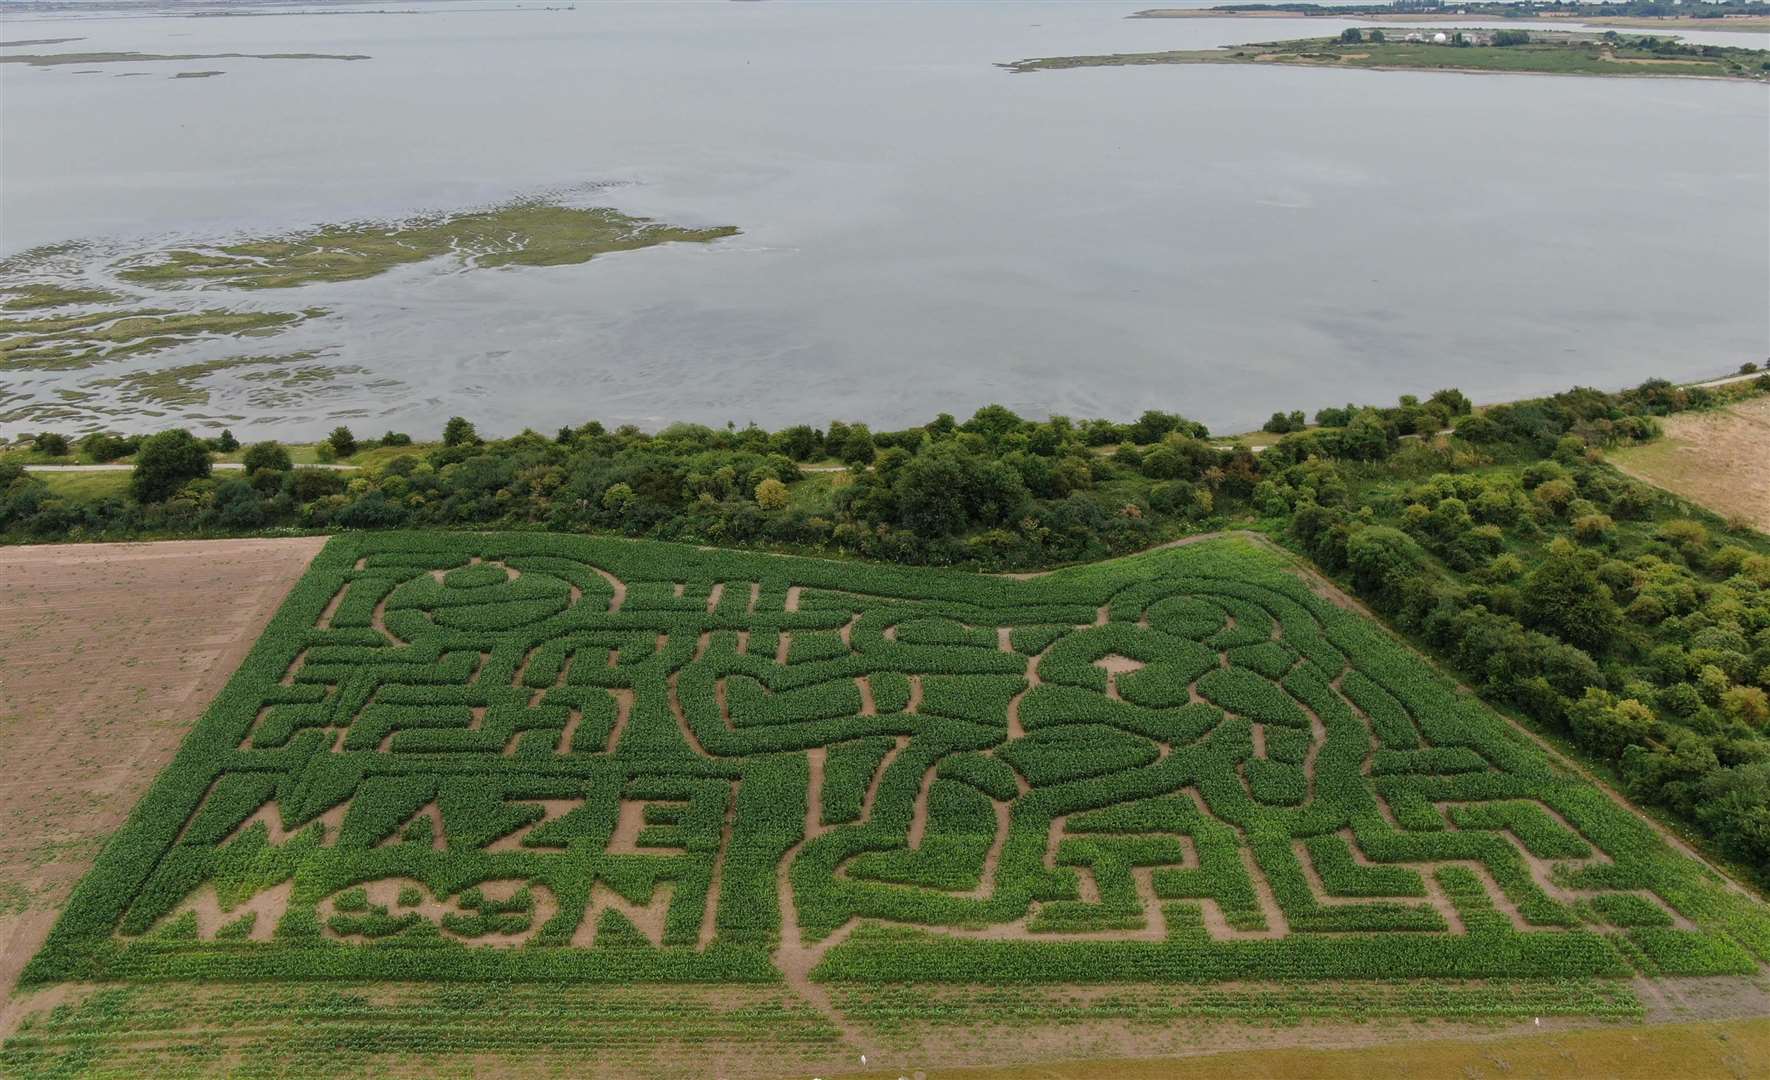 The maze will have a Super Woof theme this year – previous years’ themes included space and astronauts. Picture: Maze Moon